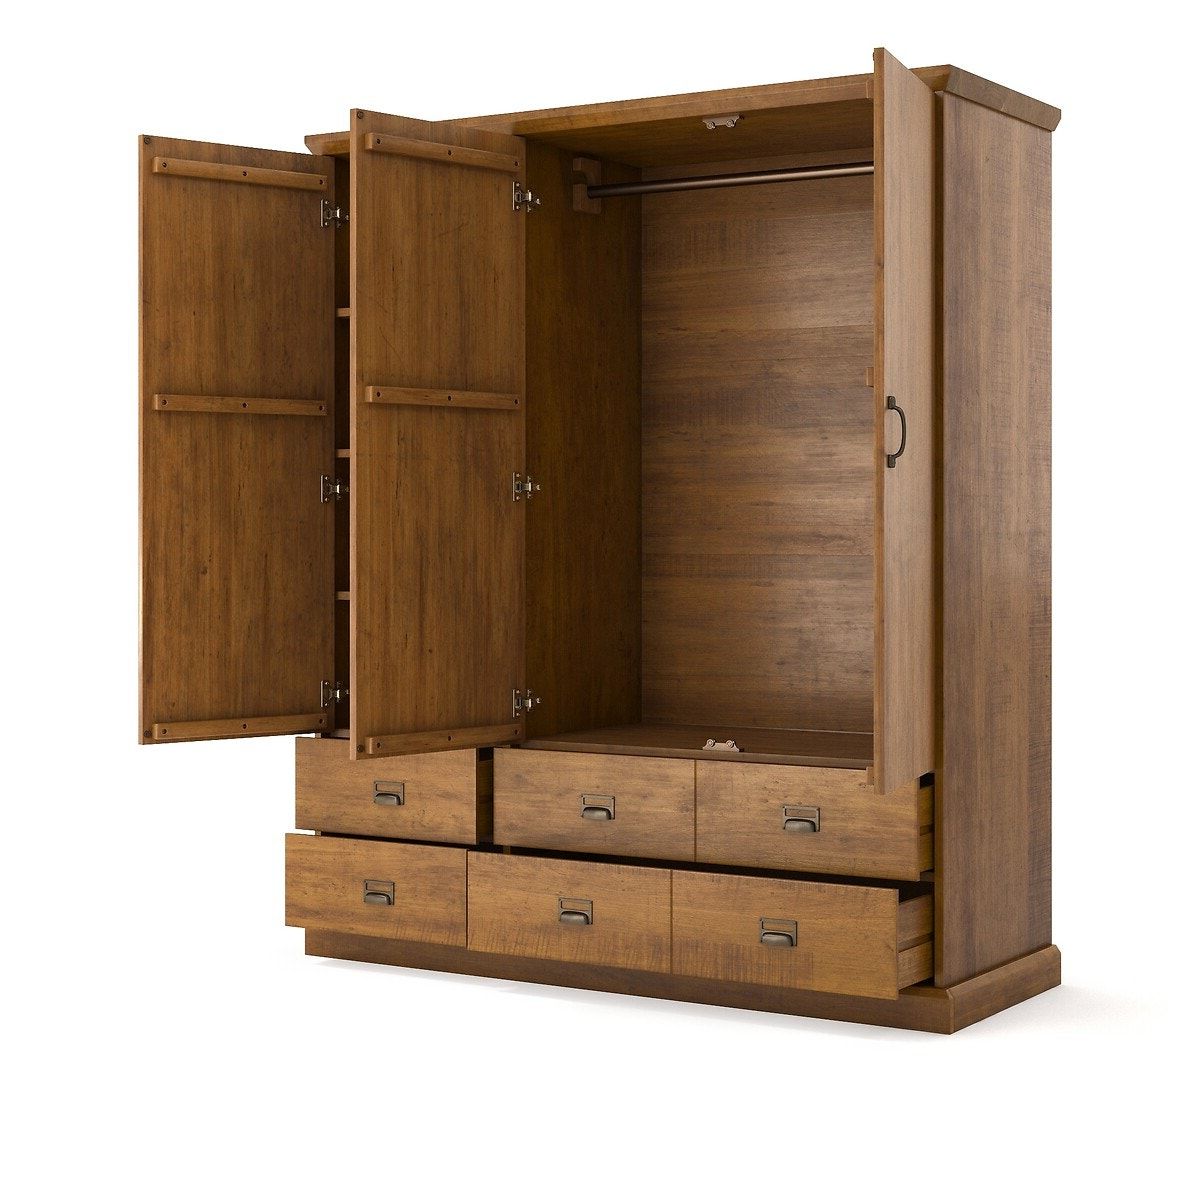 Lindley Triple 4 Drawer Pine Wardrobe, Dark Oak Wood, La Redoute Interieurs  | La Redoute With Regard To Pine Wardrobes With Drawers And Shelves (View 14 of 20)